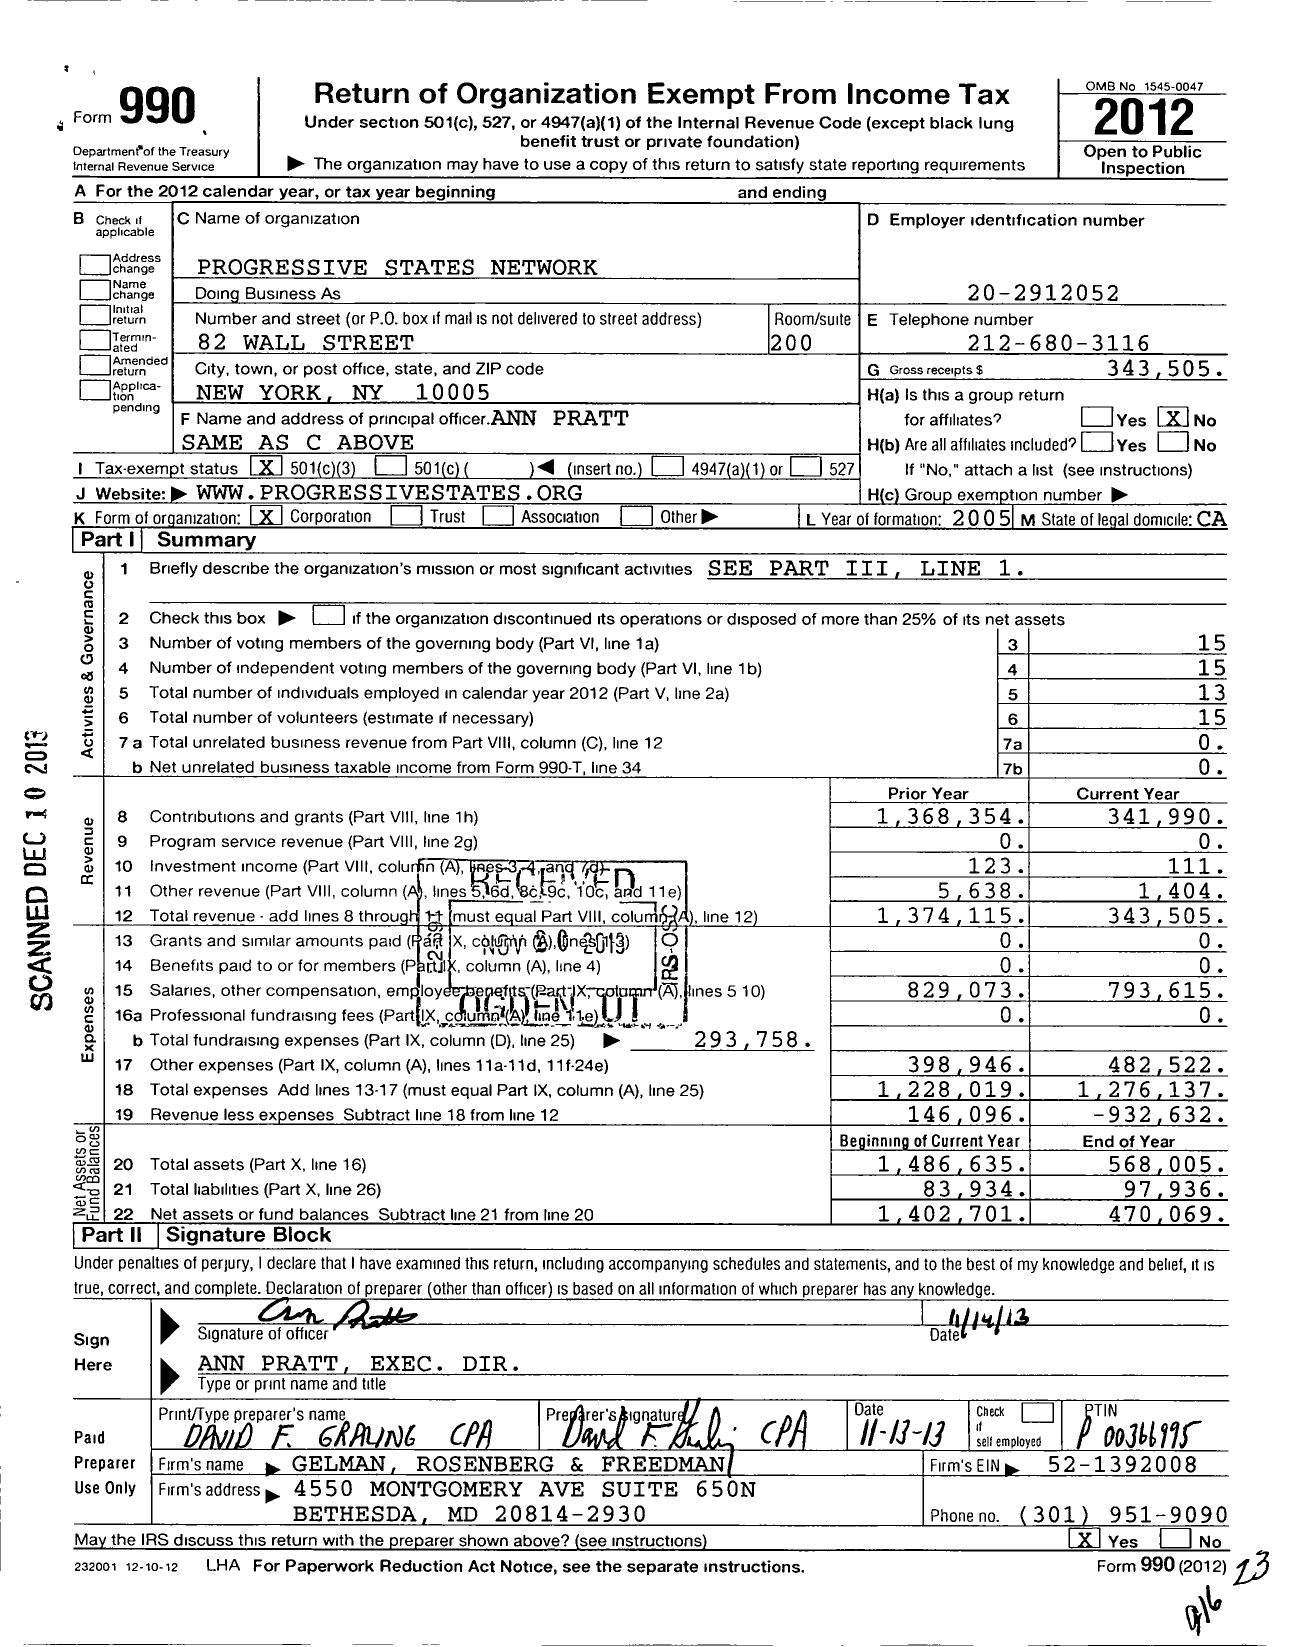 Image of first page of 2012 Form 990 for Progressive States Network